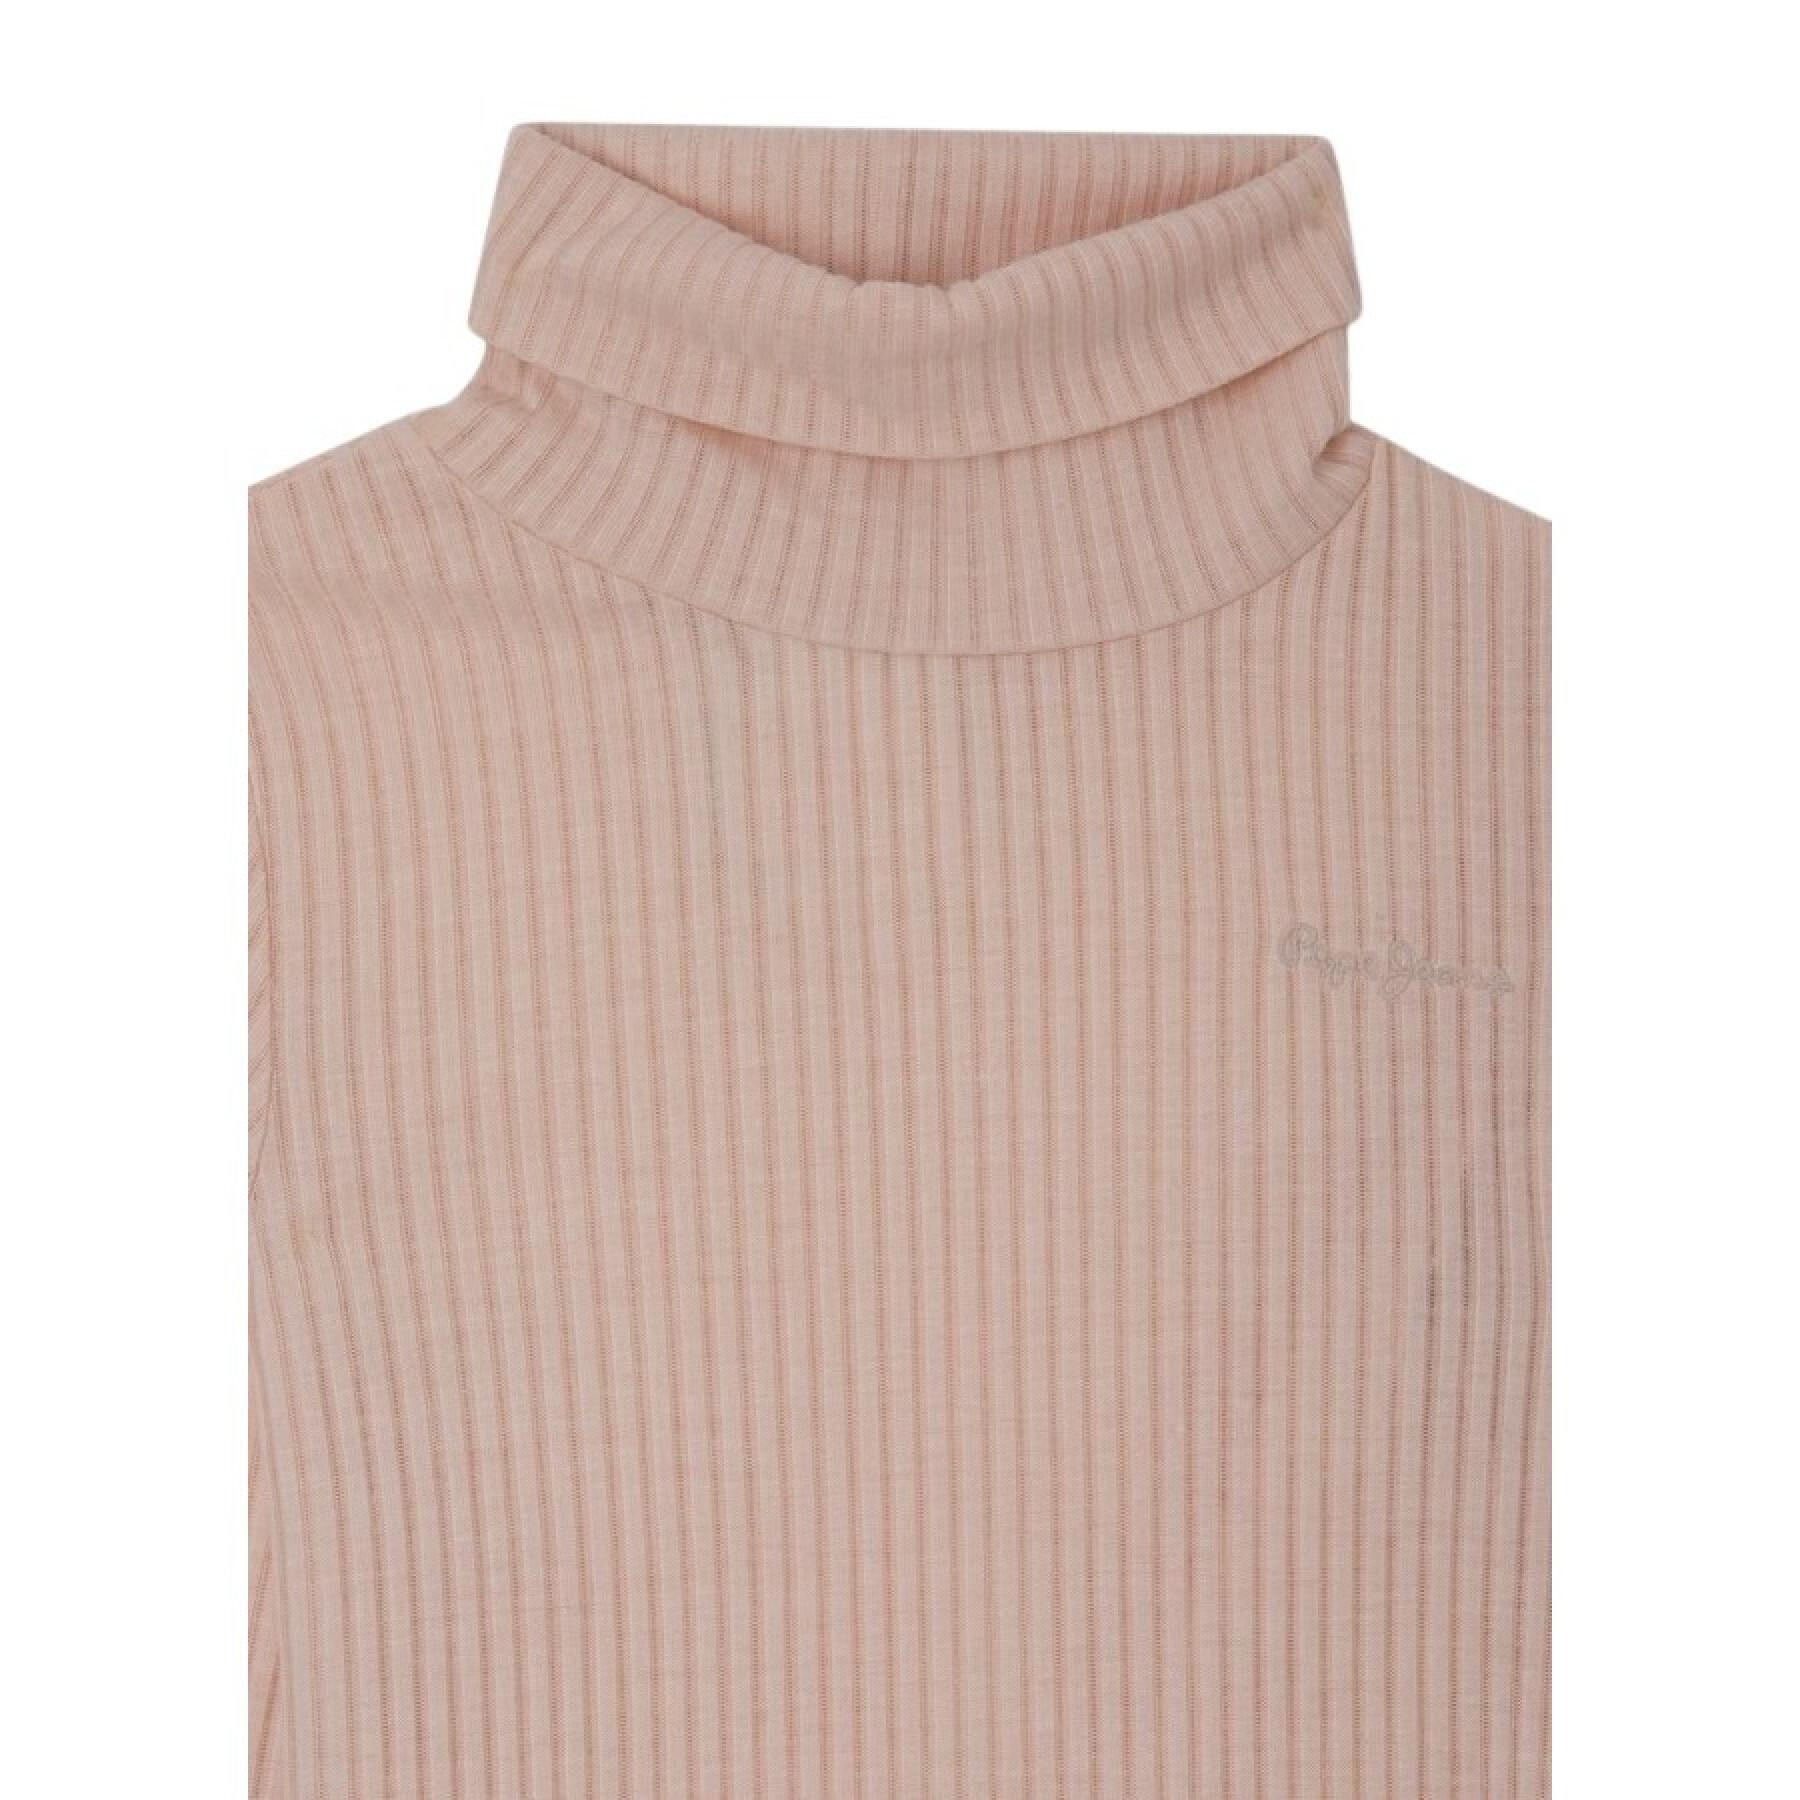 Pullover, Mädchen Pepe Jeans Bailey